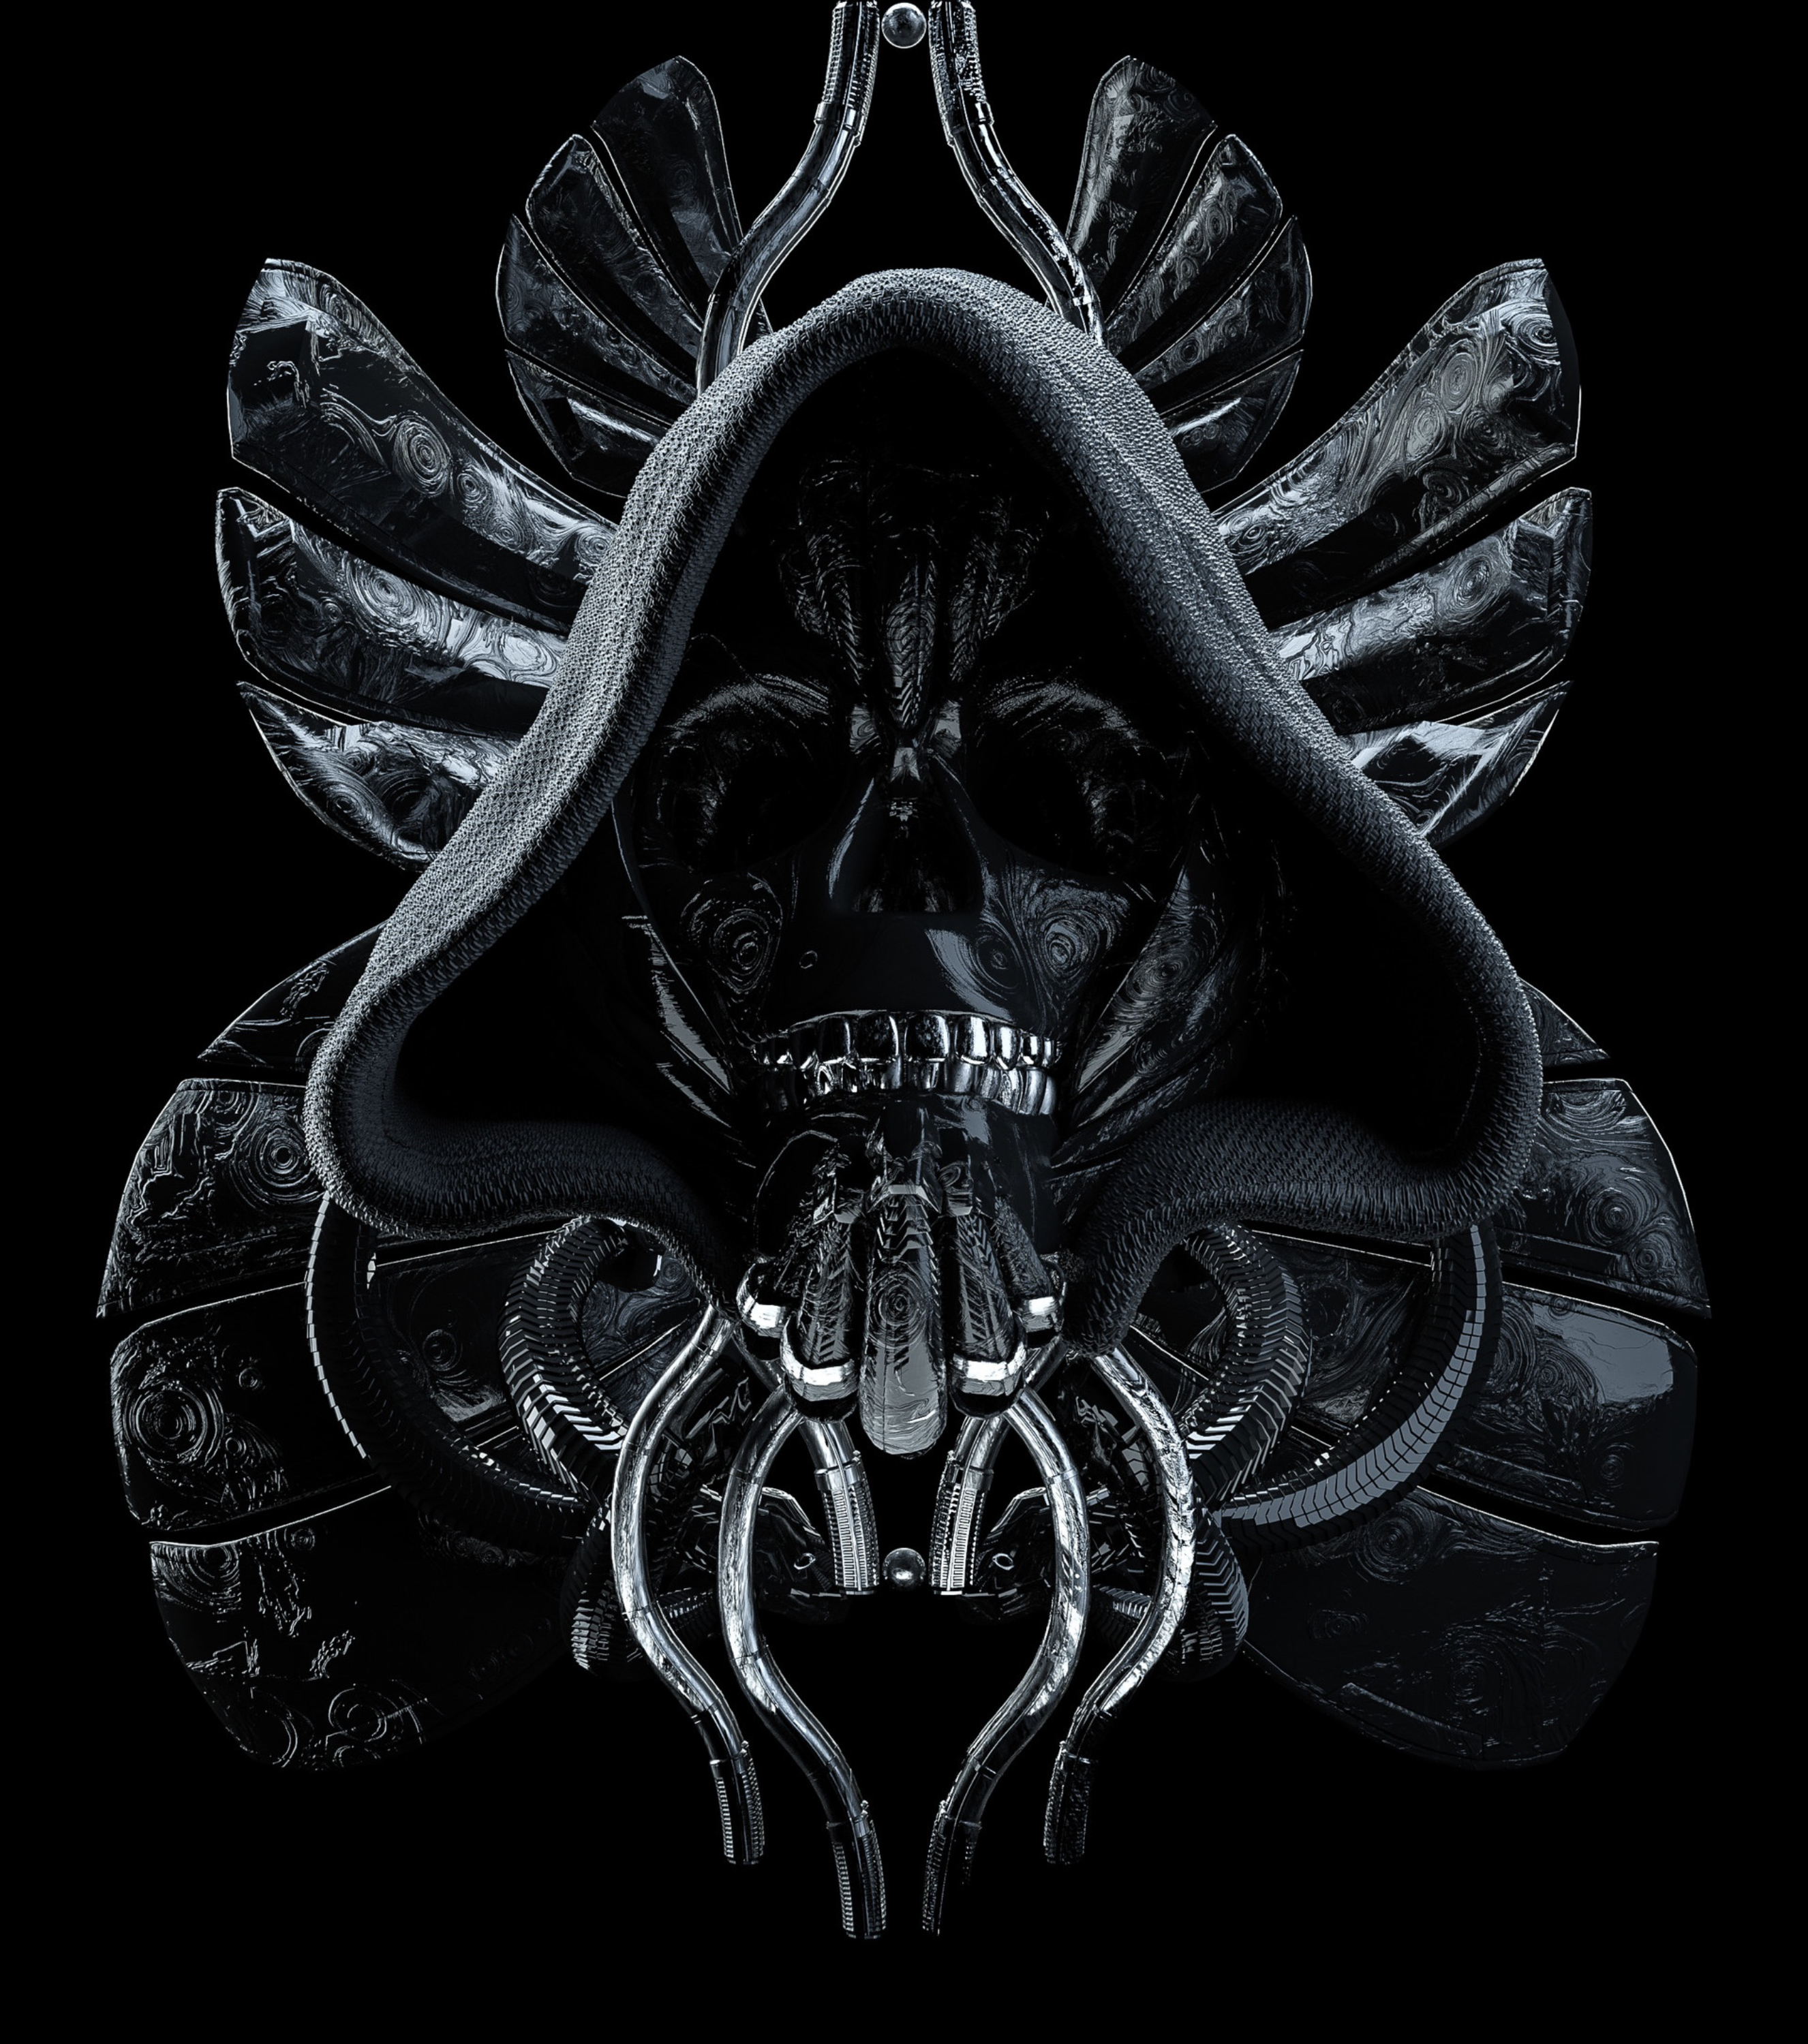 53206 free wallpaper 1080x1920 for phone, download images skull, hood, dark, sci-fi 1080x1920 for mobile